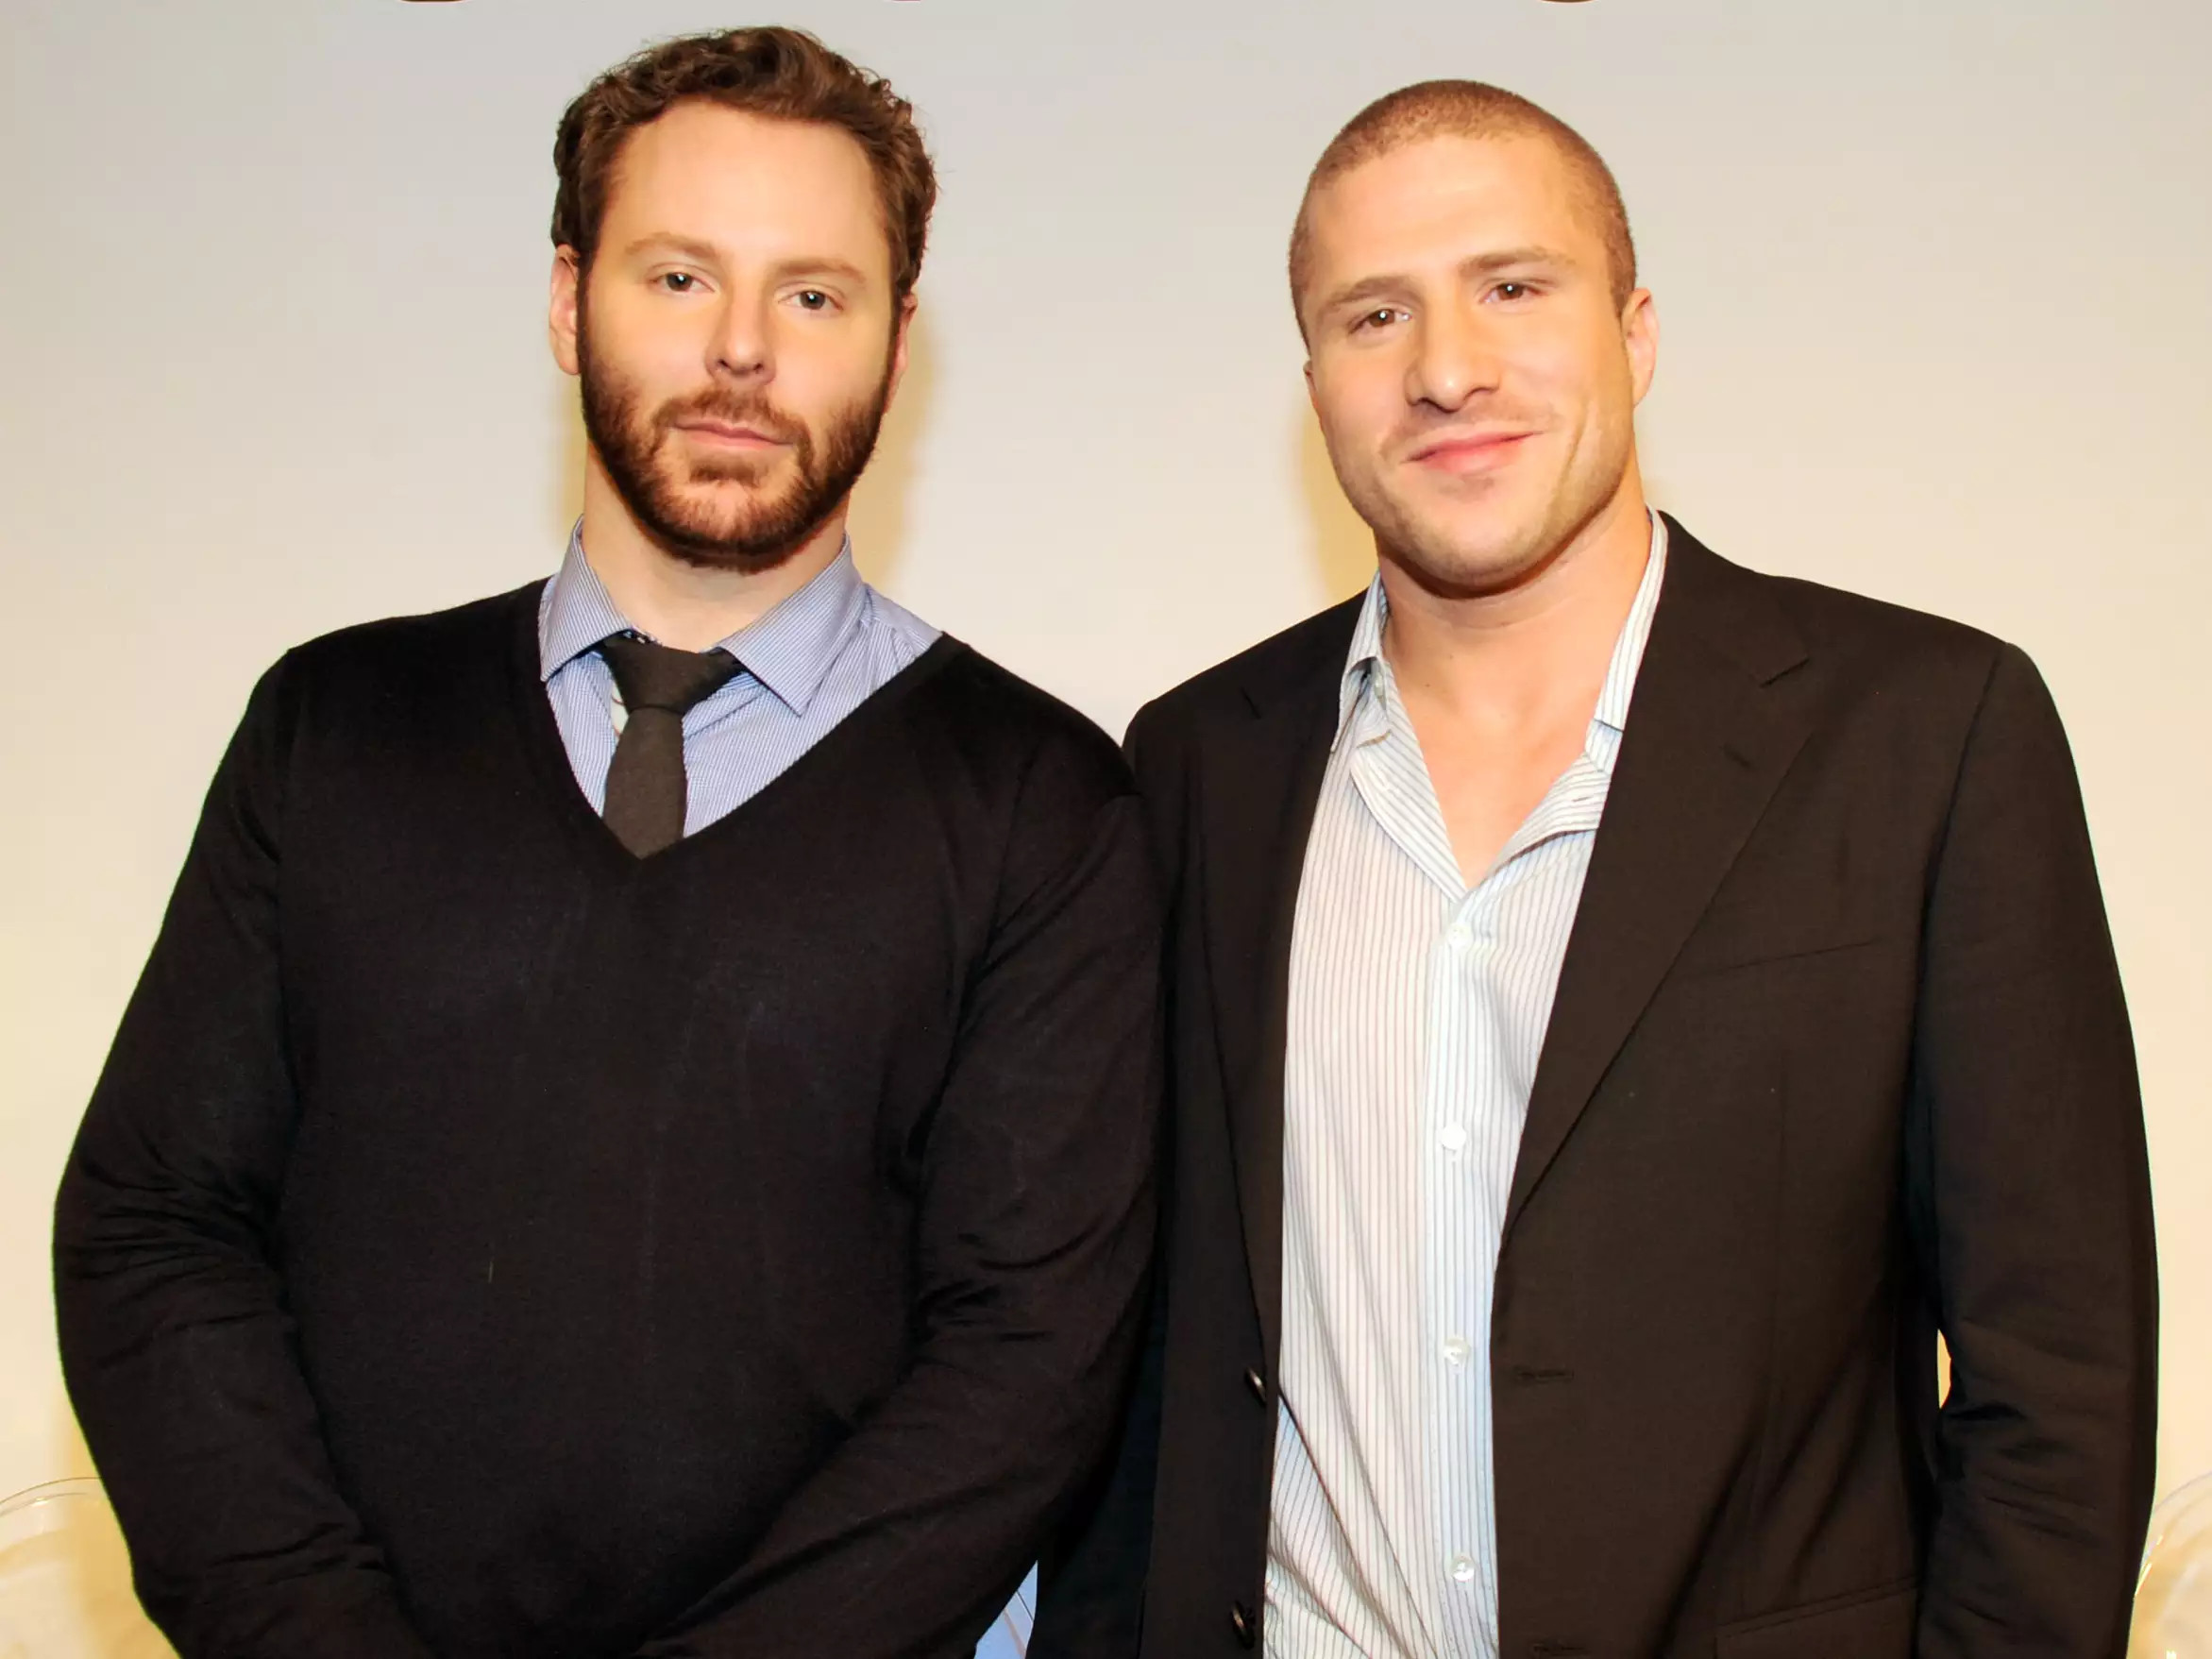 How True Superhero Sean Parker went from Launching Napster to Hacking Cancer